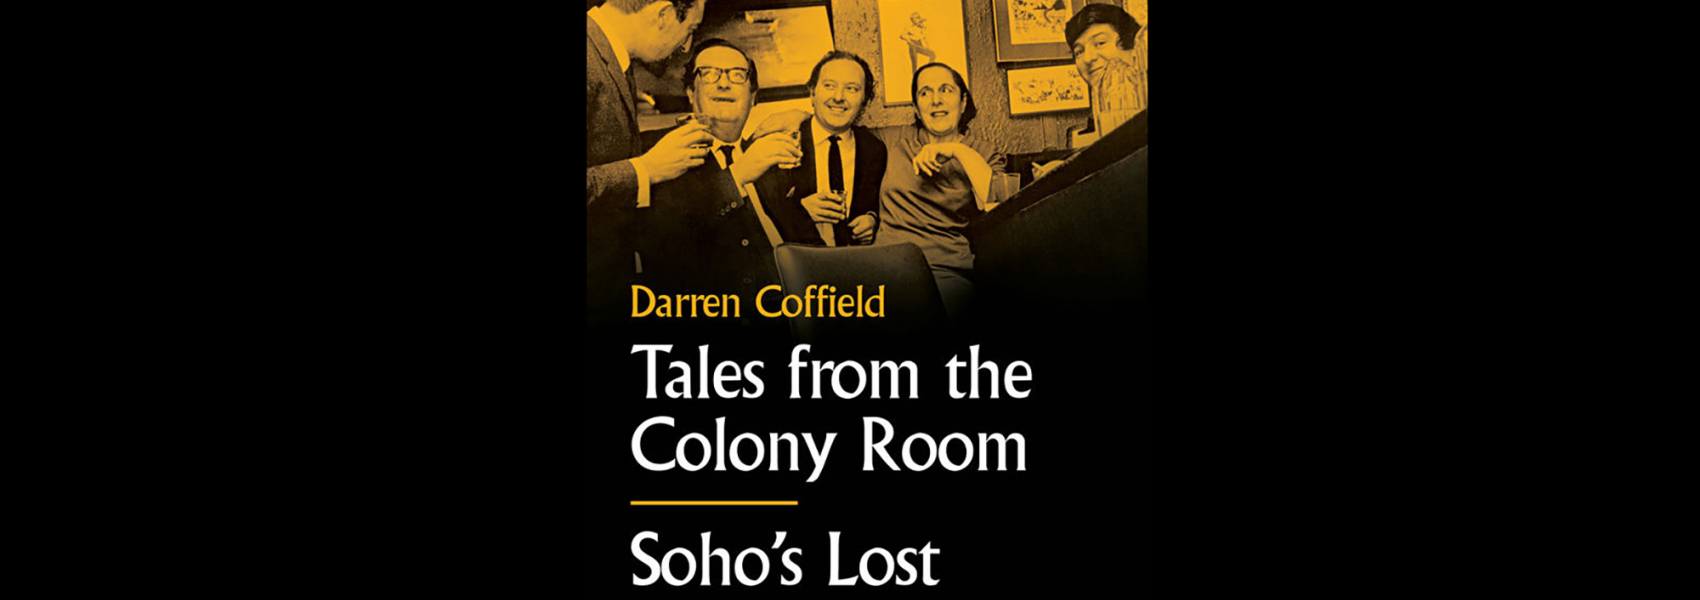 “Bring out your dead!” | Review: <em>Tales from the Colony Room</em> by Darren Coffield